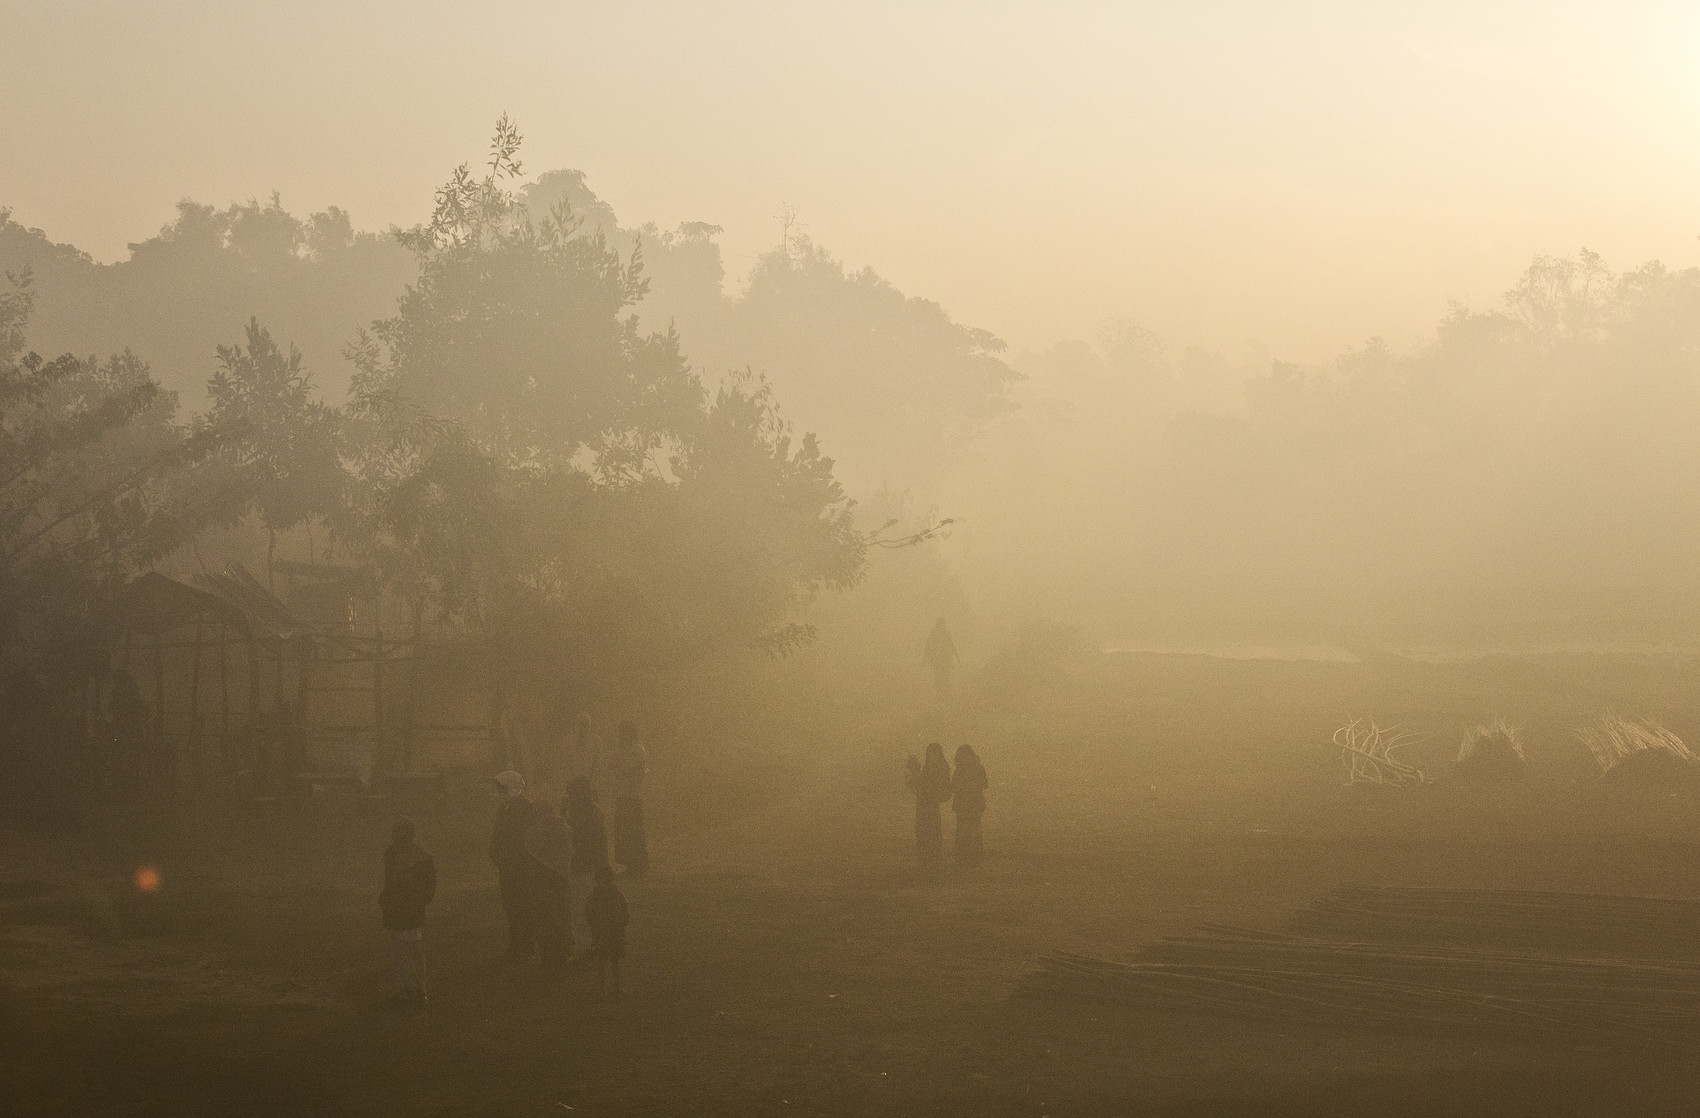 Rohingya refugees walk through early morning mist in a refugee camp in Cox's Bazar, Bangladesh.